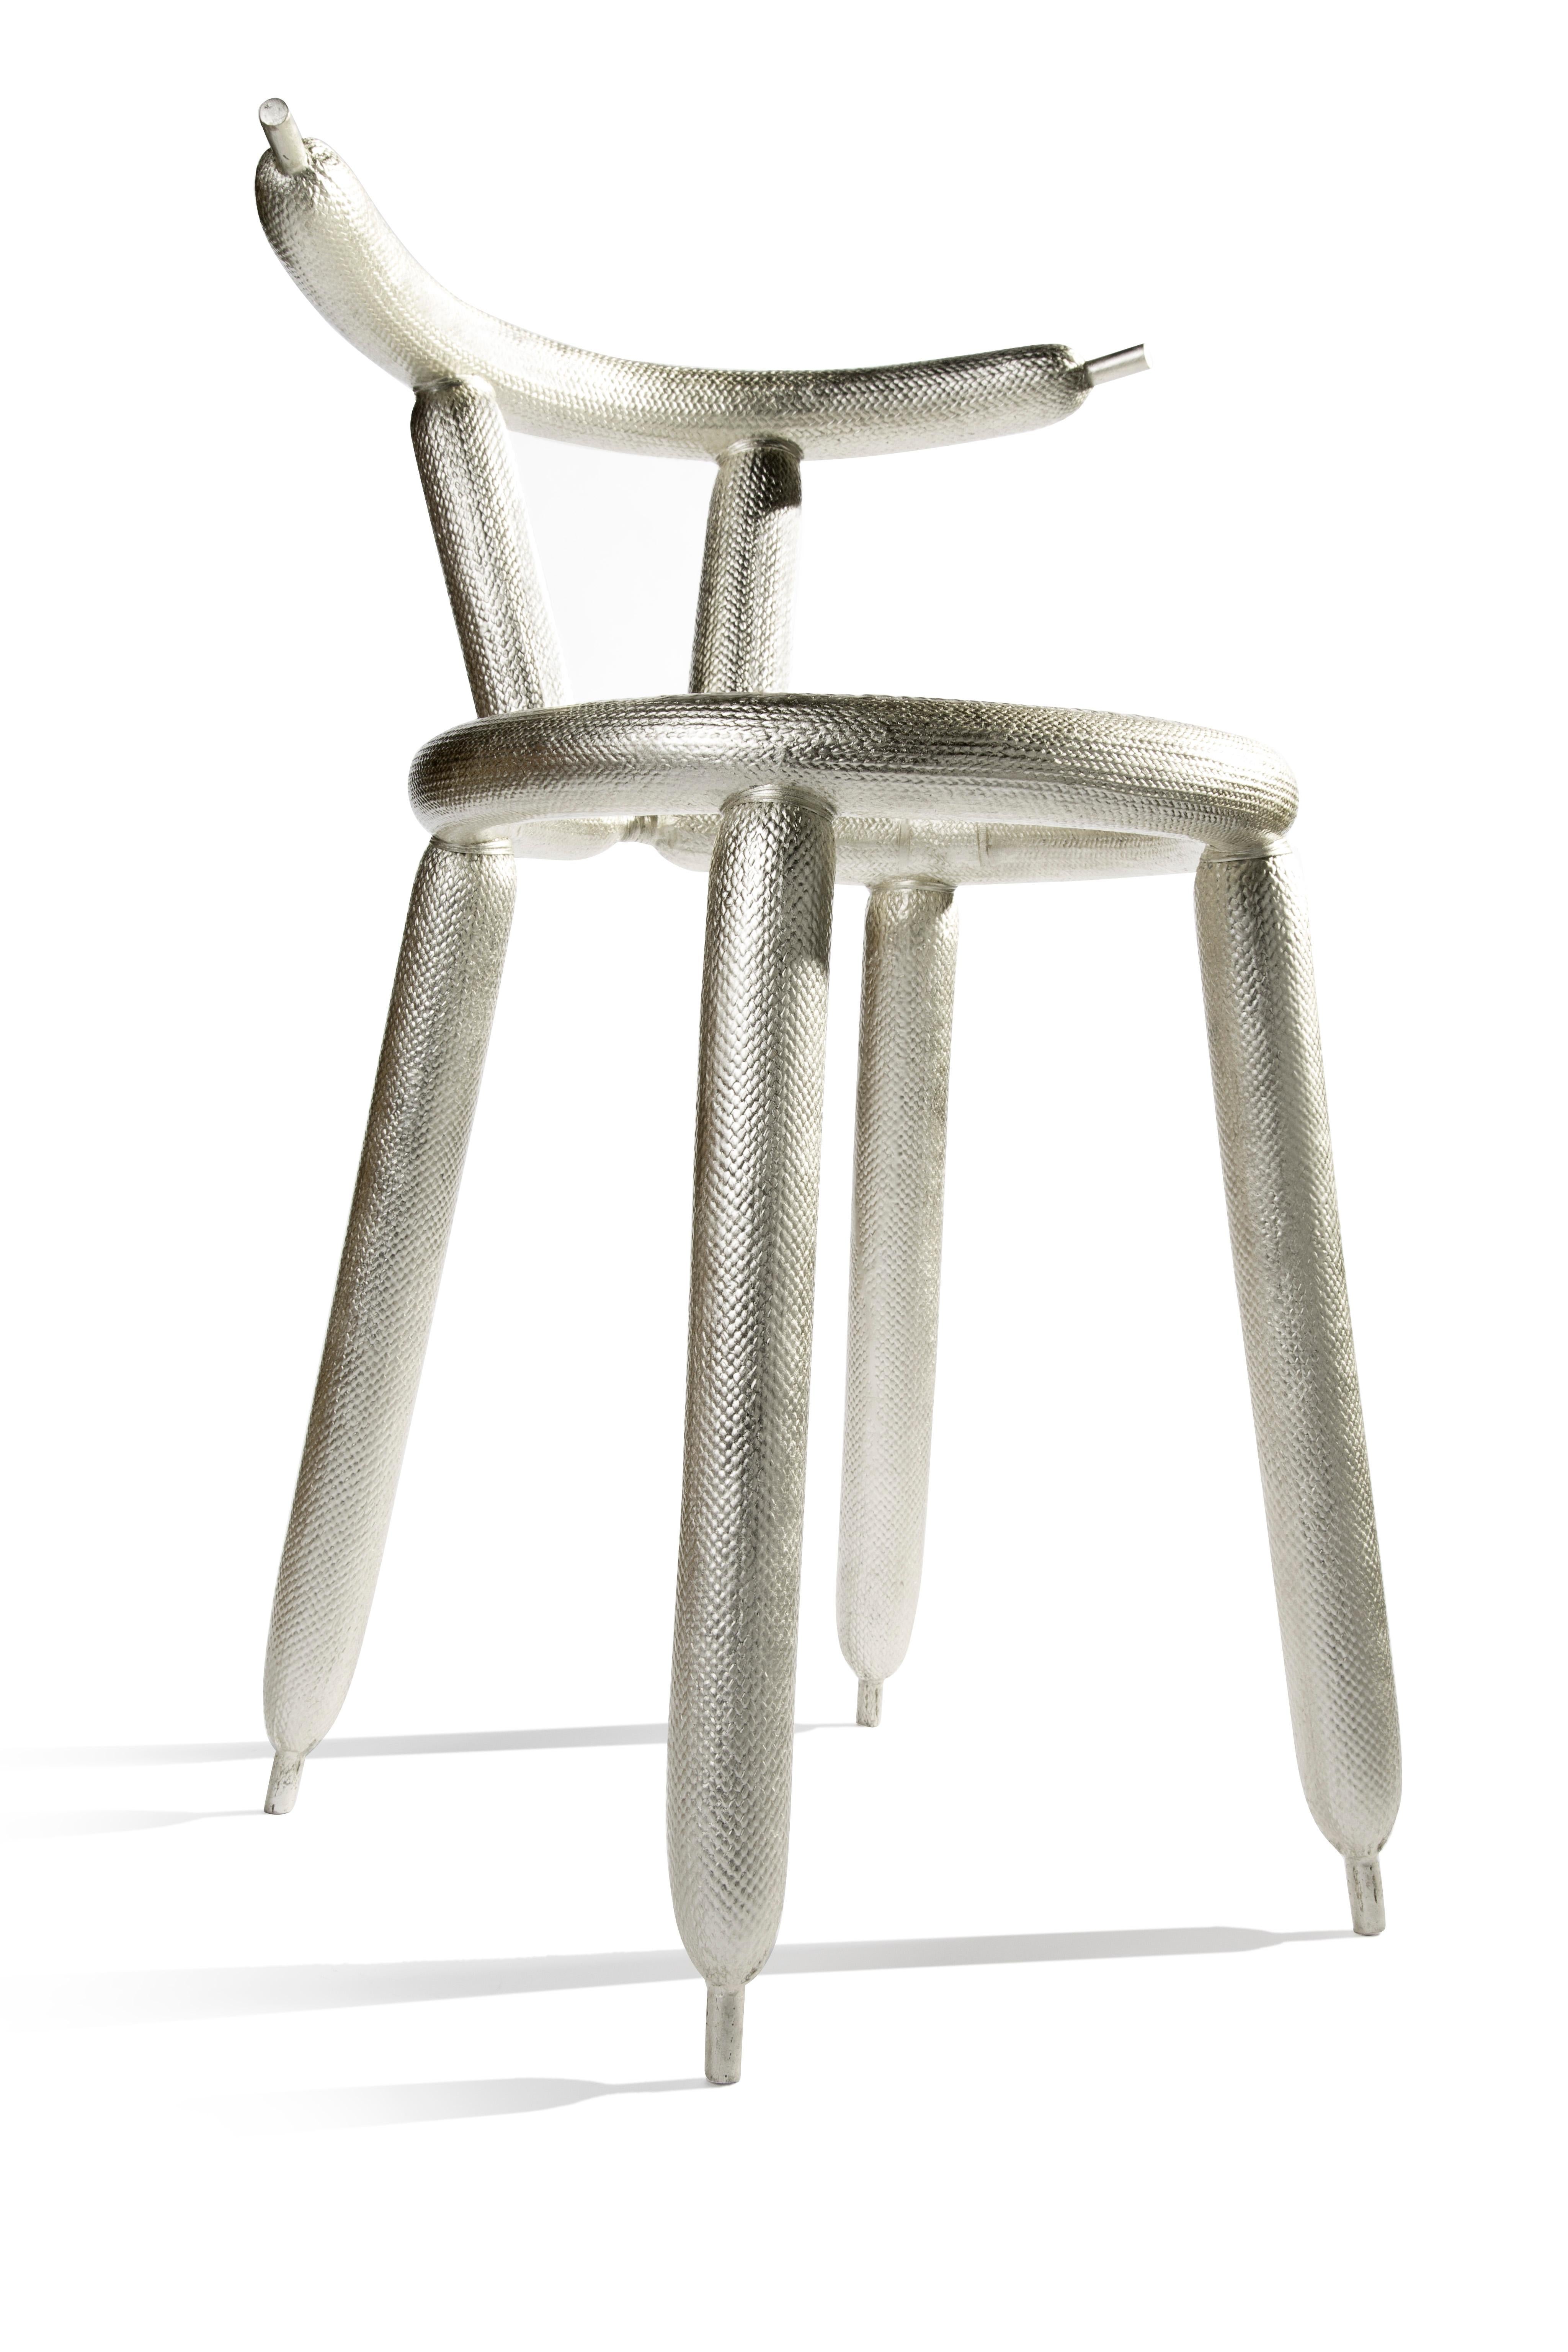 Brushed Carbon Balloon Chair White Gold, by Marcel Wanders, 2013, Limited Edition #2/5 For Sale